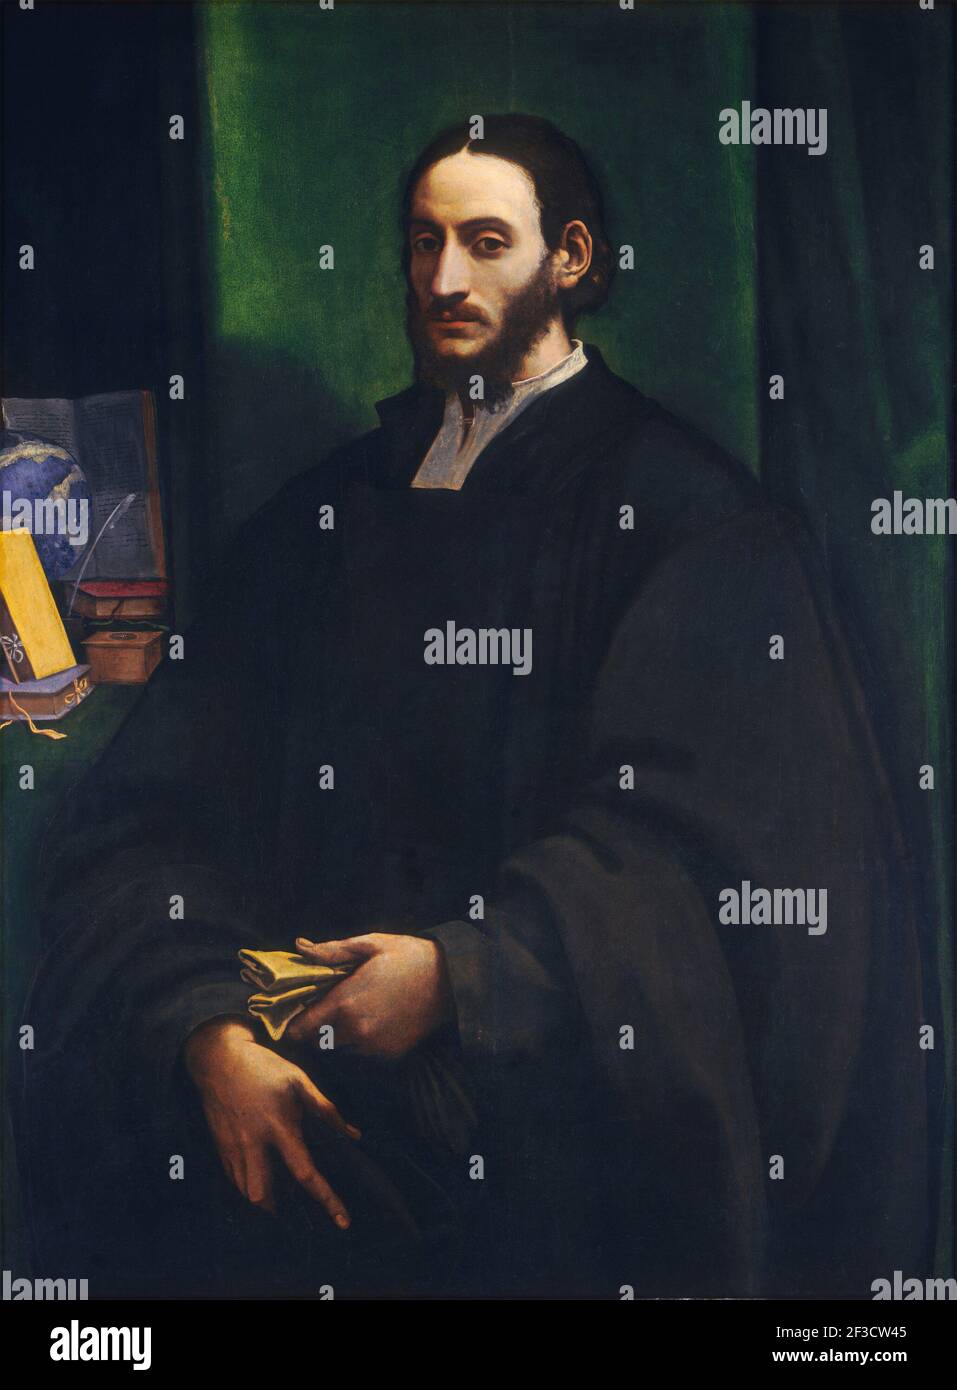 Portrait of a Humanist, c. 1520. Stock Photo